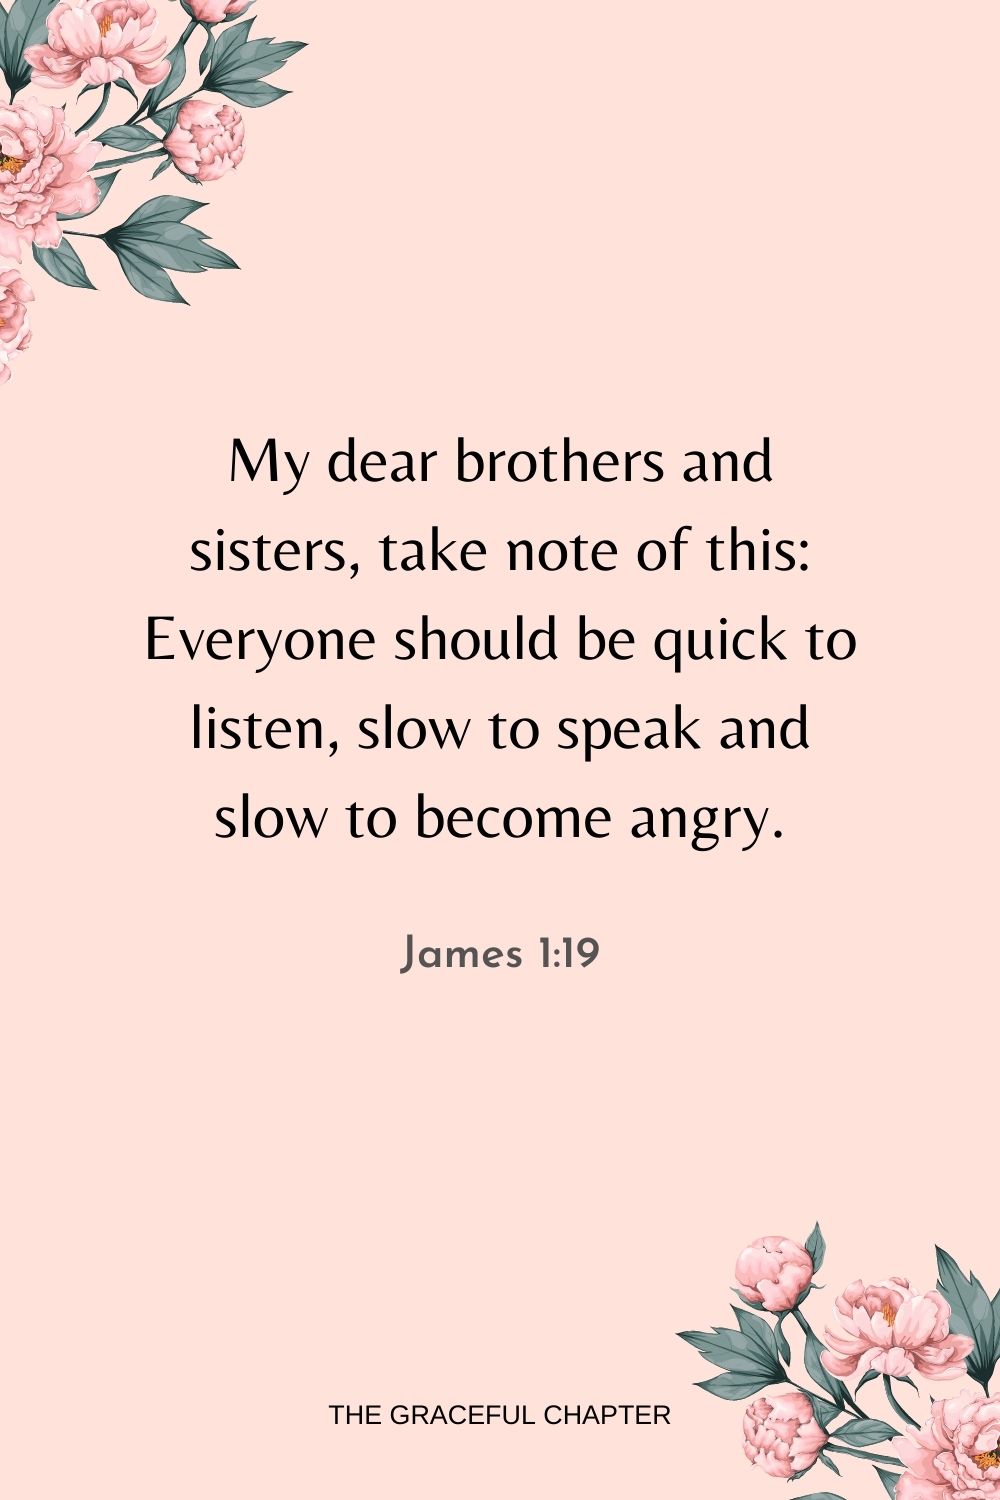 My dear brothers and sisters, take note of this: Everyone should be quick to listen, slow to speak and slow to become angry. James 1:19